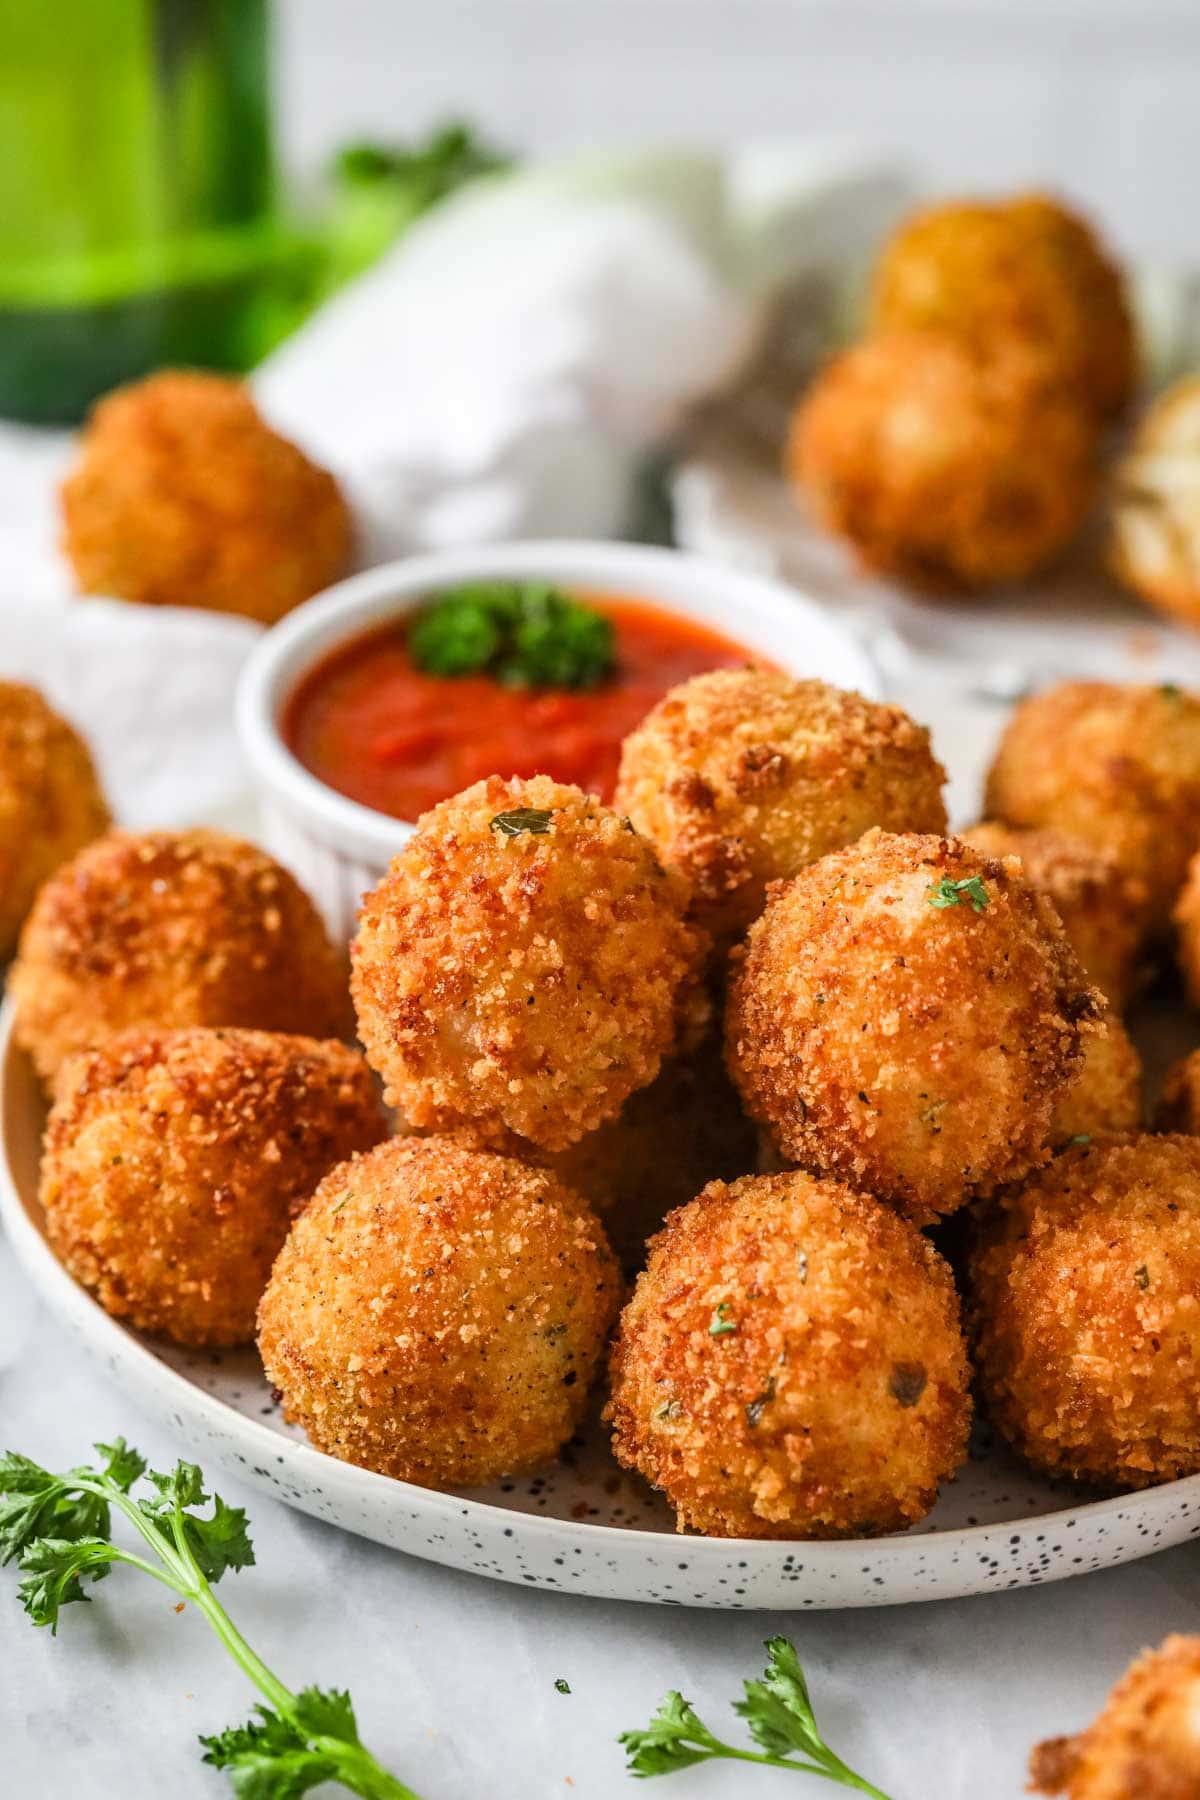 Bowl of Sicilian fried rice balls with marinara for dipping.